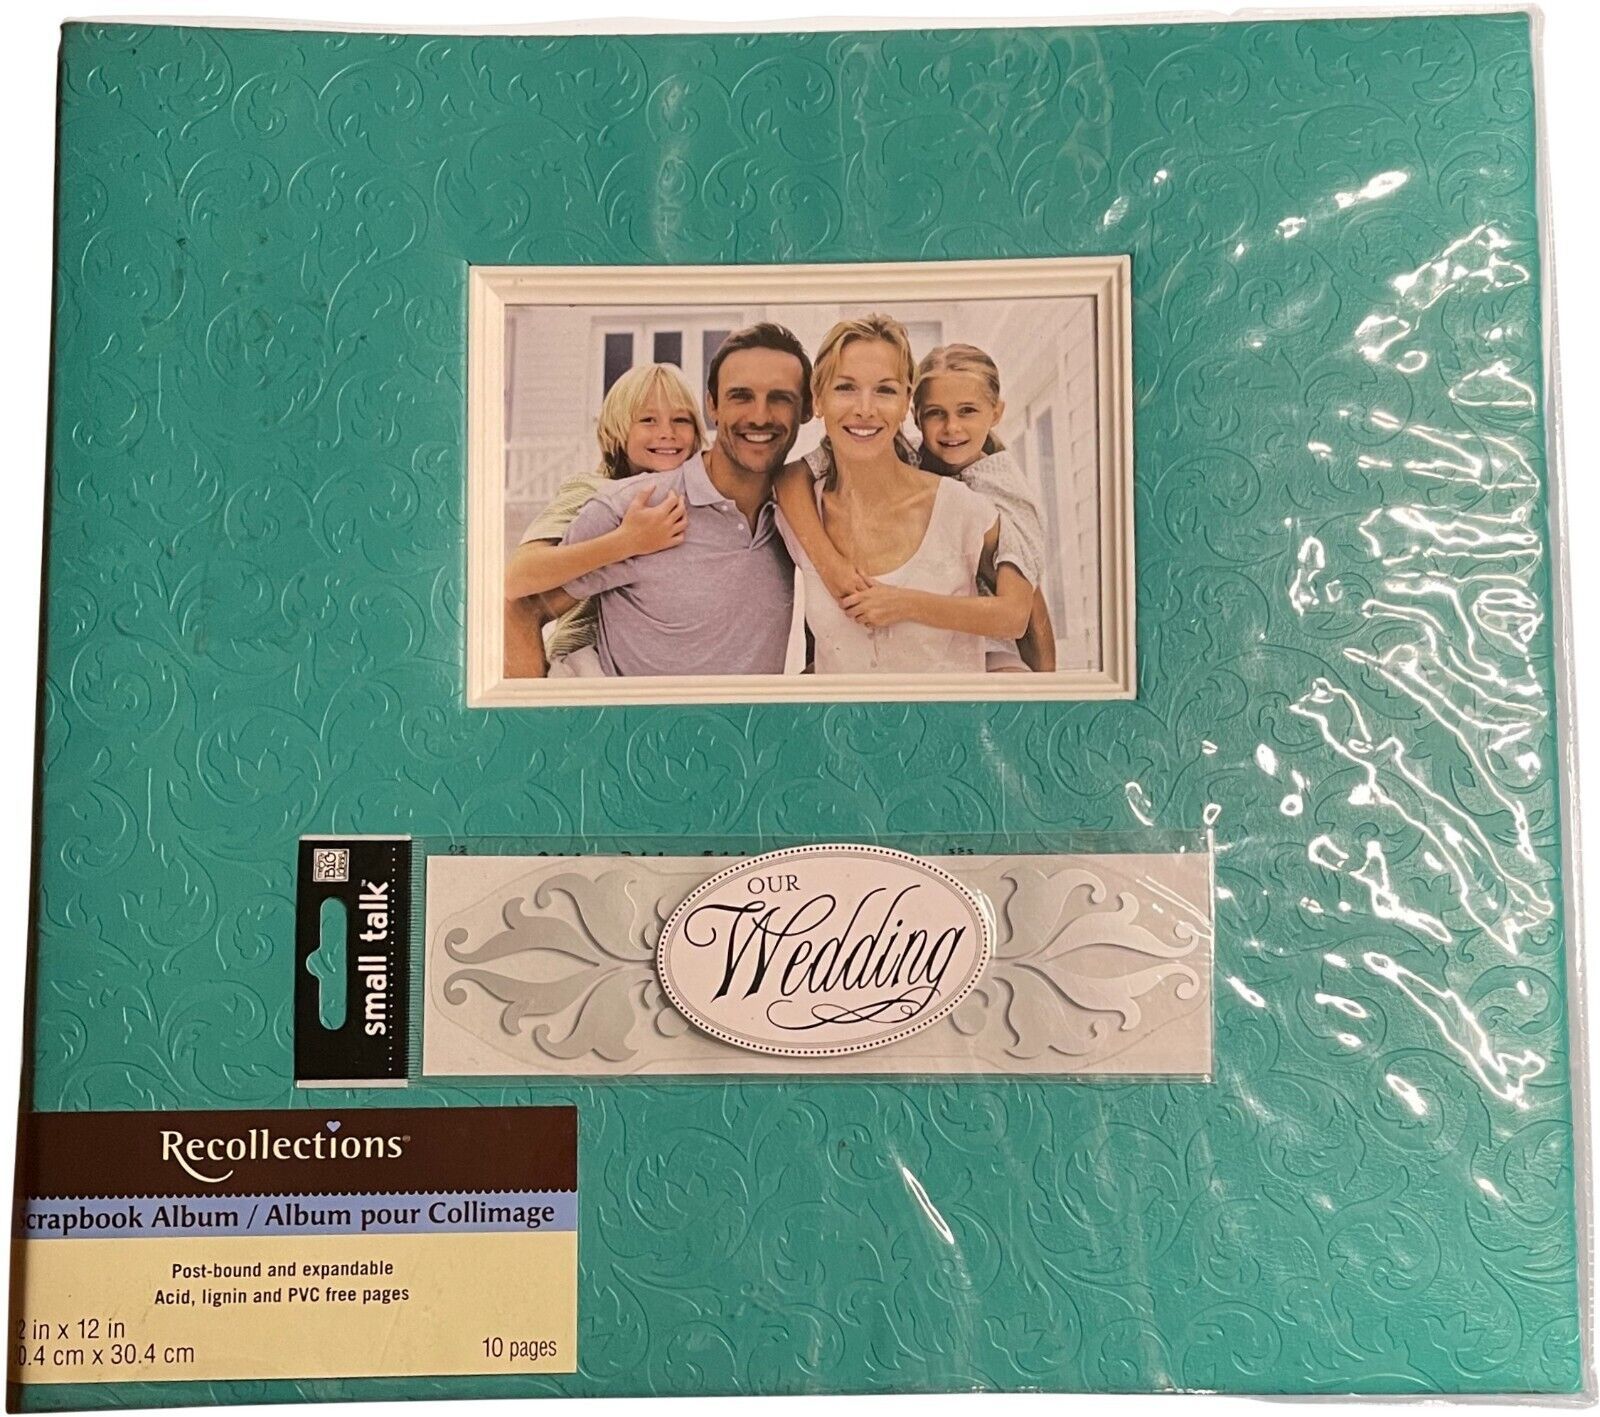 Our Wedding, Recollections Scrapbook Album 12X12, 10 pages, turquoise, new - $23.99